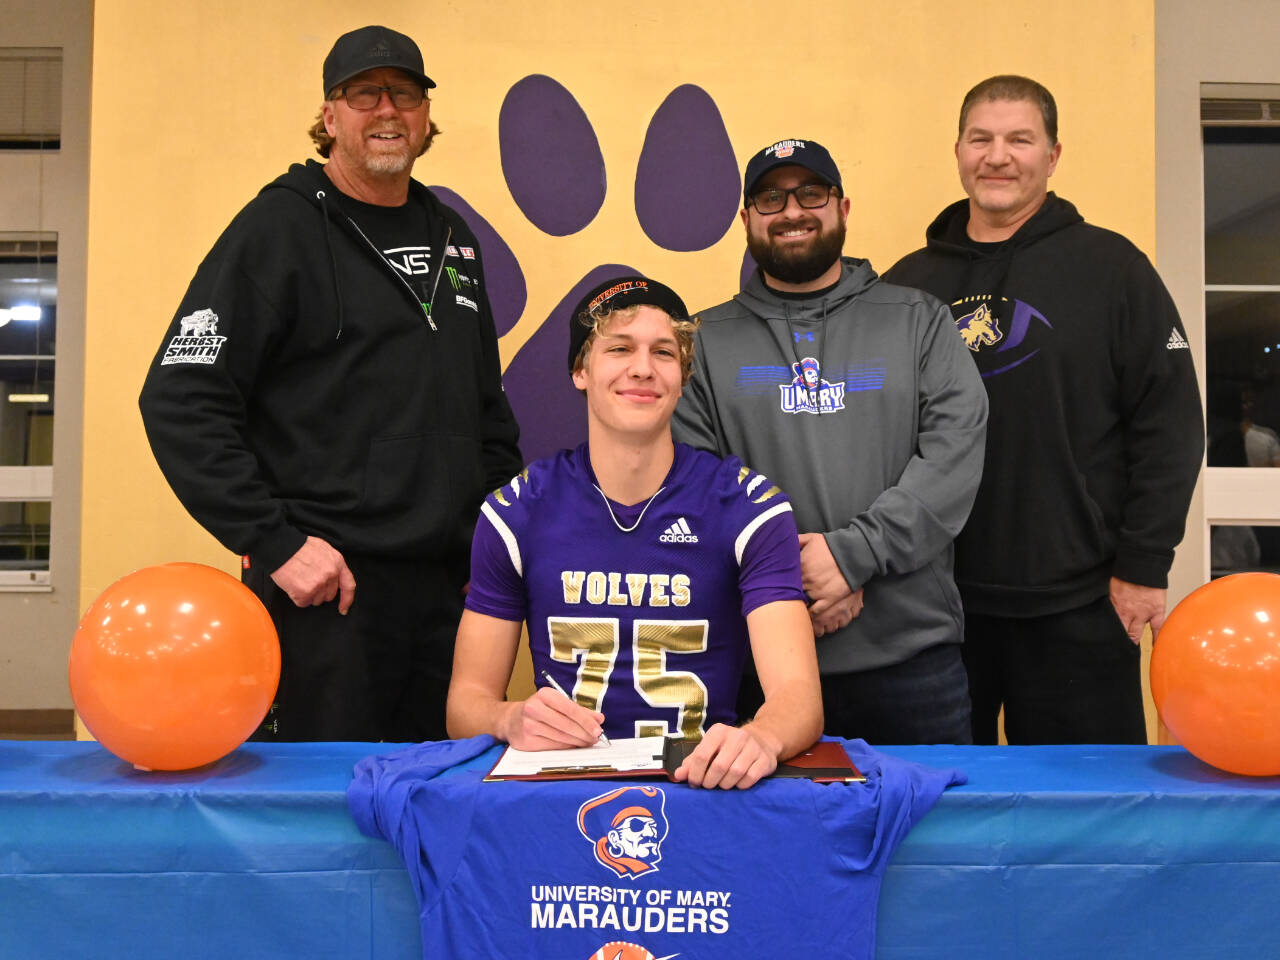 Sequim Gazette photo by Michael Dashiell
Sequim’s Jack Henninger on Feb. 7 signs a letter of intent to play at the University of Mary (North Dakota). The all-Olympic League kicker plans to study occupational therapy and kick for the Marauders’ football squad. Behind him are, from left, soccer coach David Breckenridge, football special teams coach Cody Buckmaster and football head coach Erik Wiker.